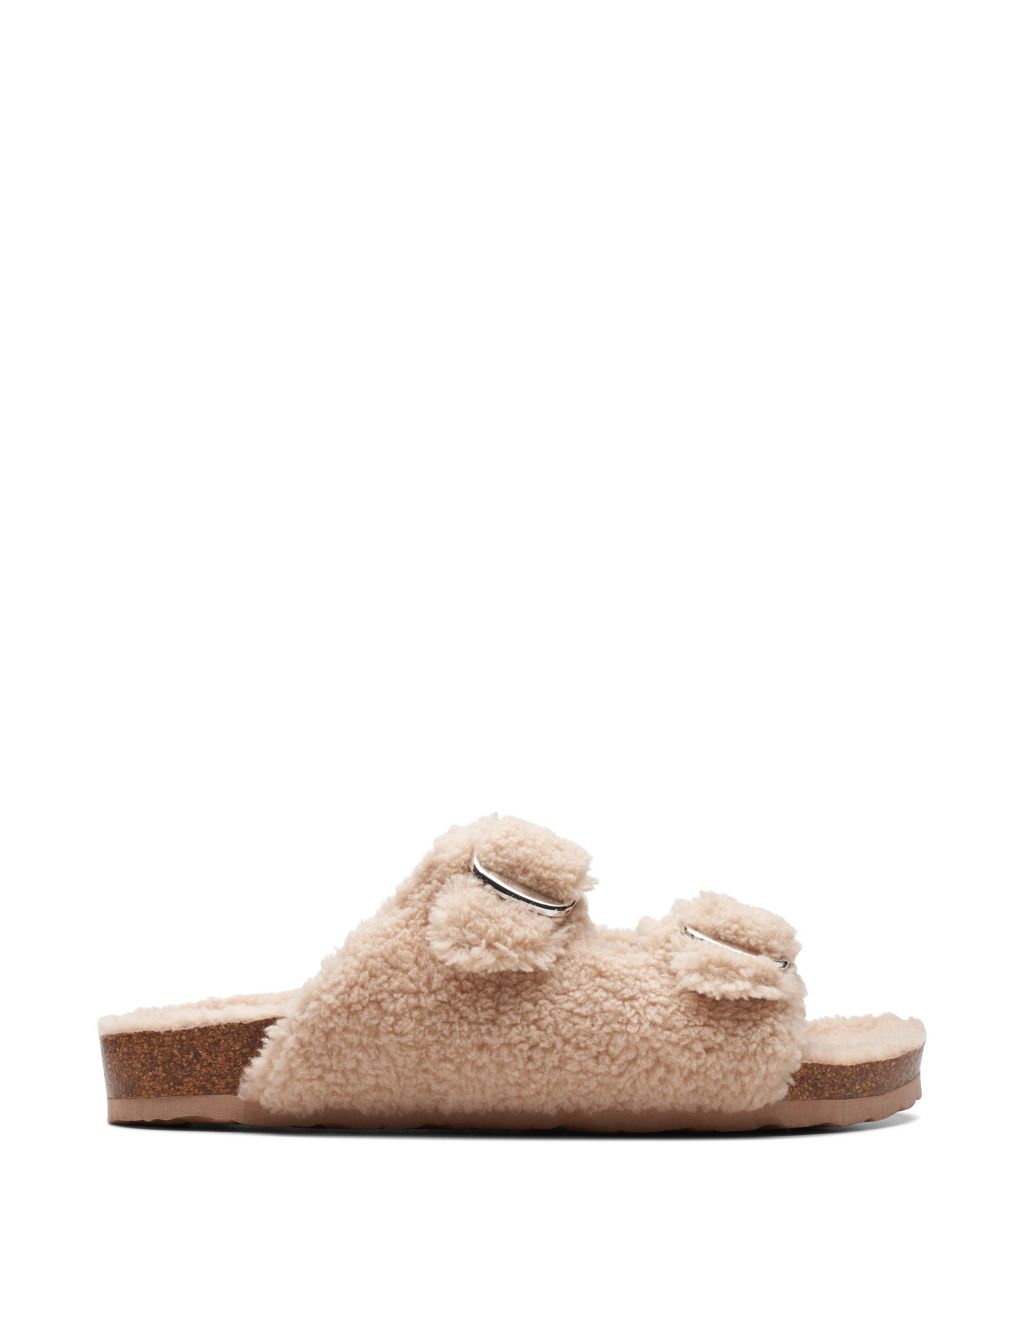 Faux Shearling Buckle Slider Slippers image 1